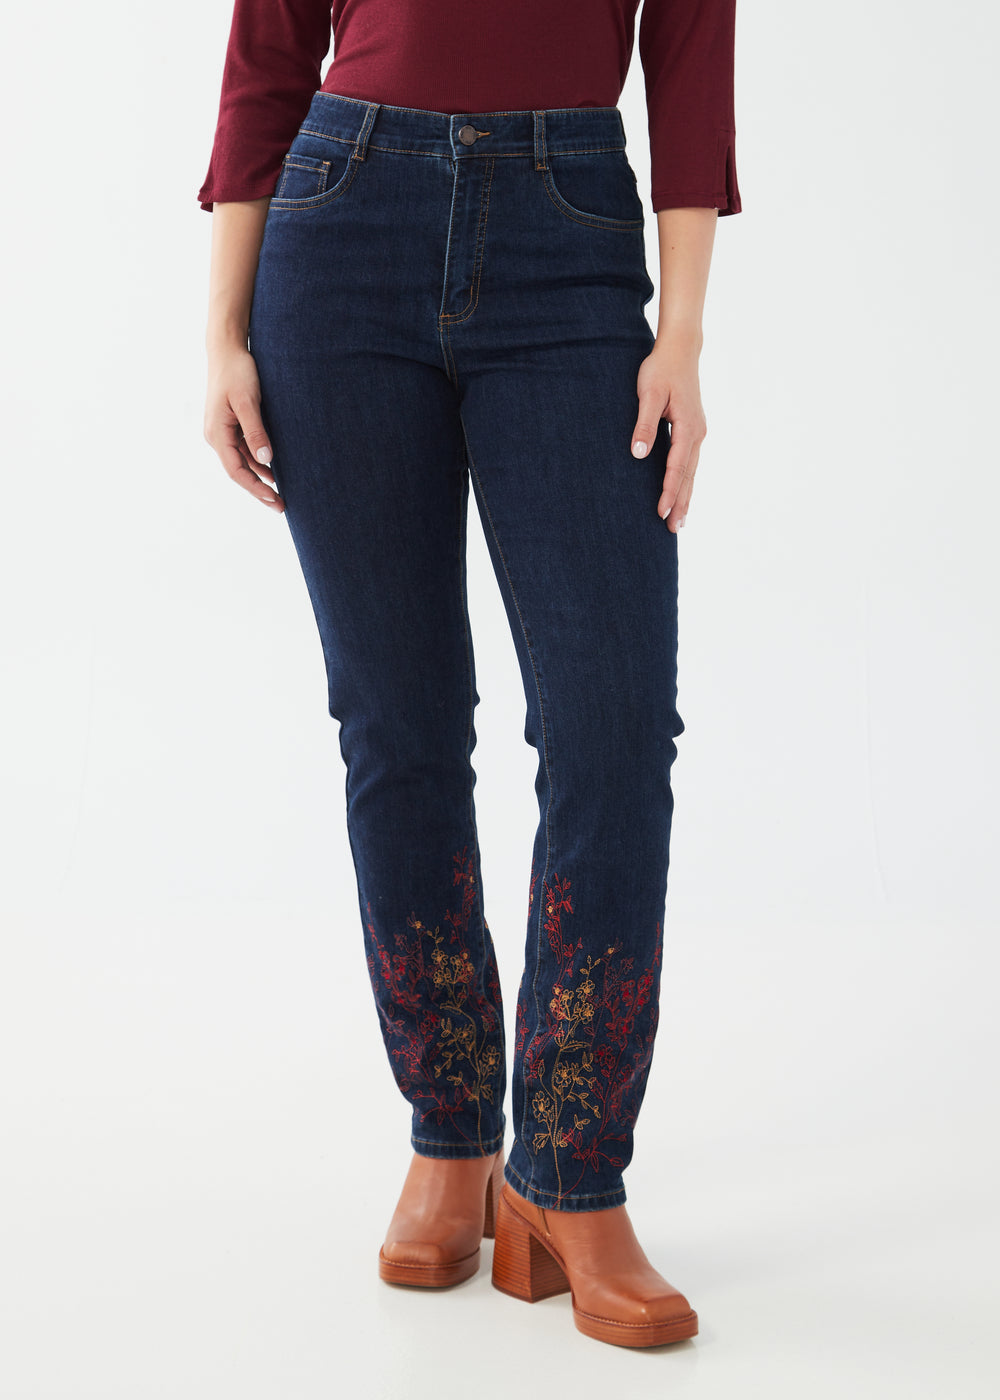 FDJ Suzanne straight jeans 6906779, embroidered